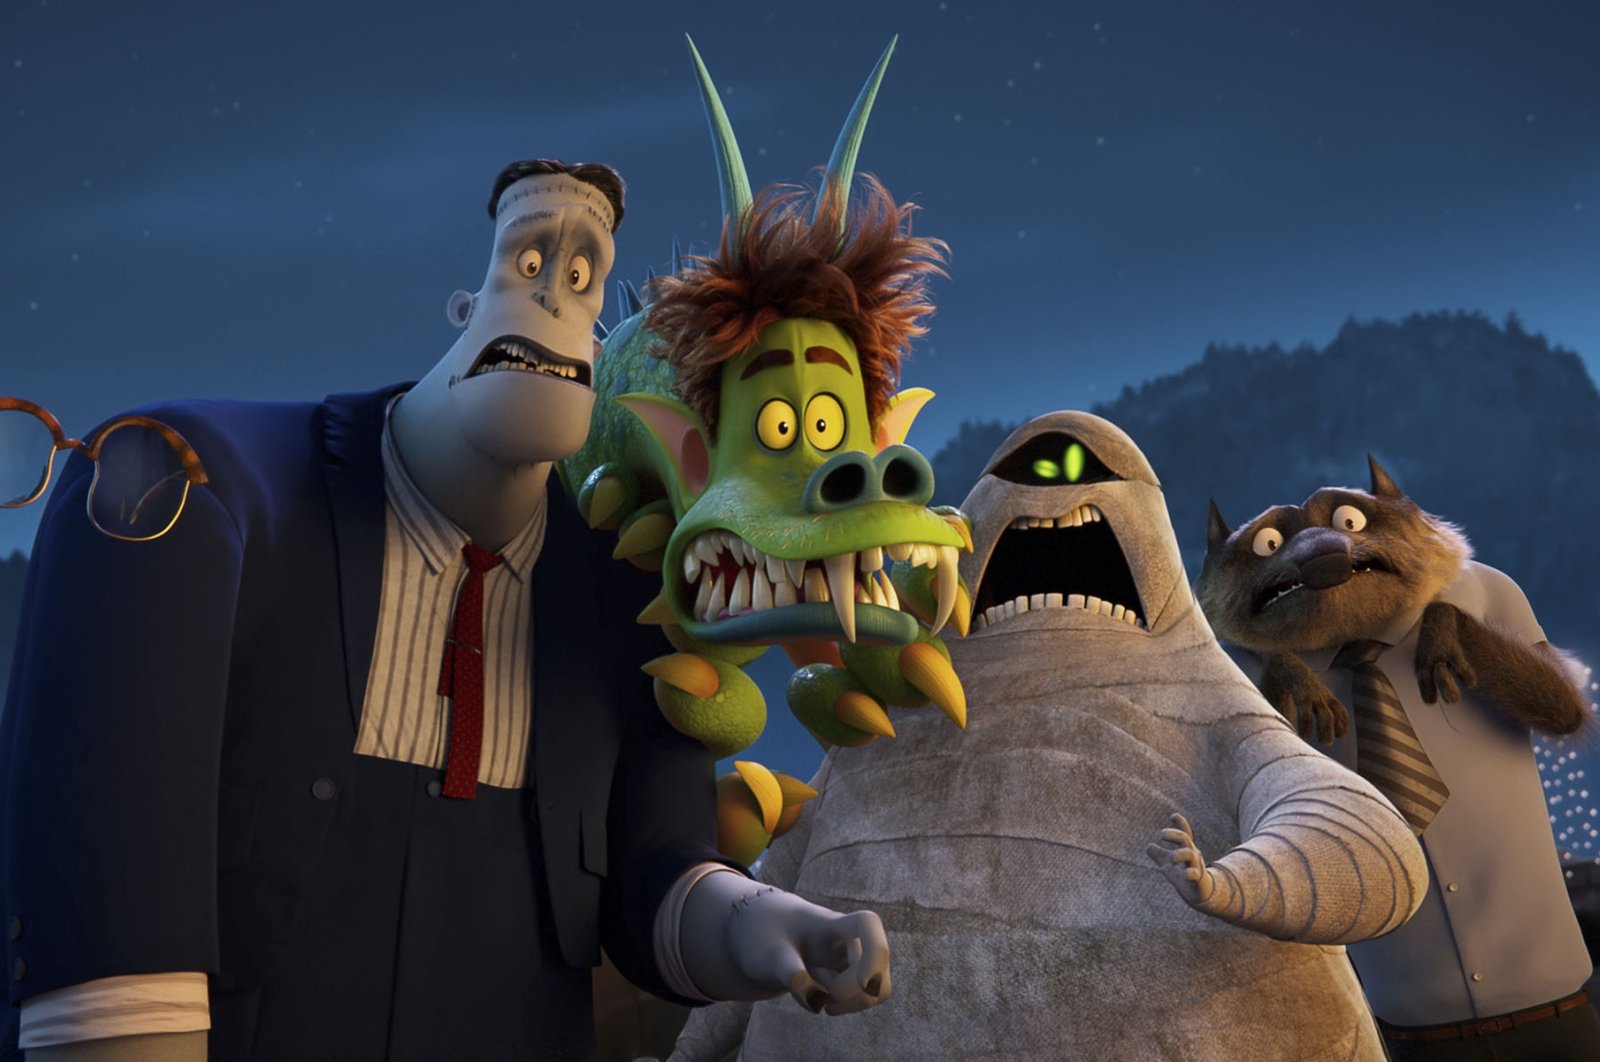 Griffin the Invisible Man (L), voiced by David Spade, Frank (C-L), voiced by Brad Abrell, Monster Johnny (C), voiced by Andy Samberg, Murray (C-R), voiced by Keegan-Michael Key, and Wayne, voiced by Steve Buscemi, in a scene from the animated film &quot;Hotel Transylvania: Transformania.&quot; (Sony Pictures Animation via AP)